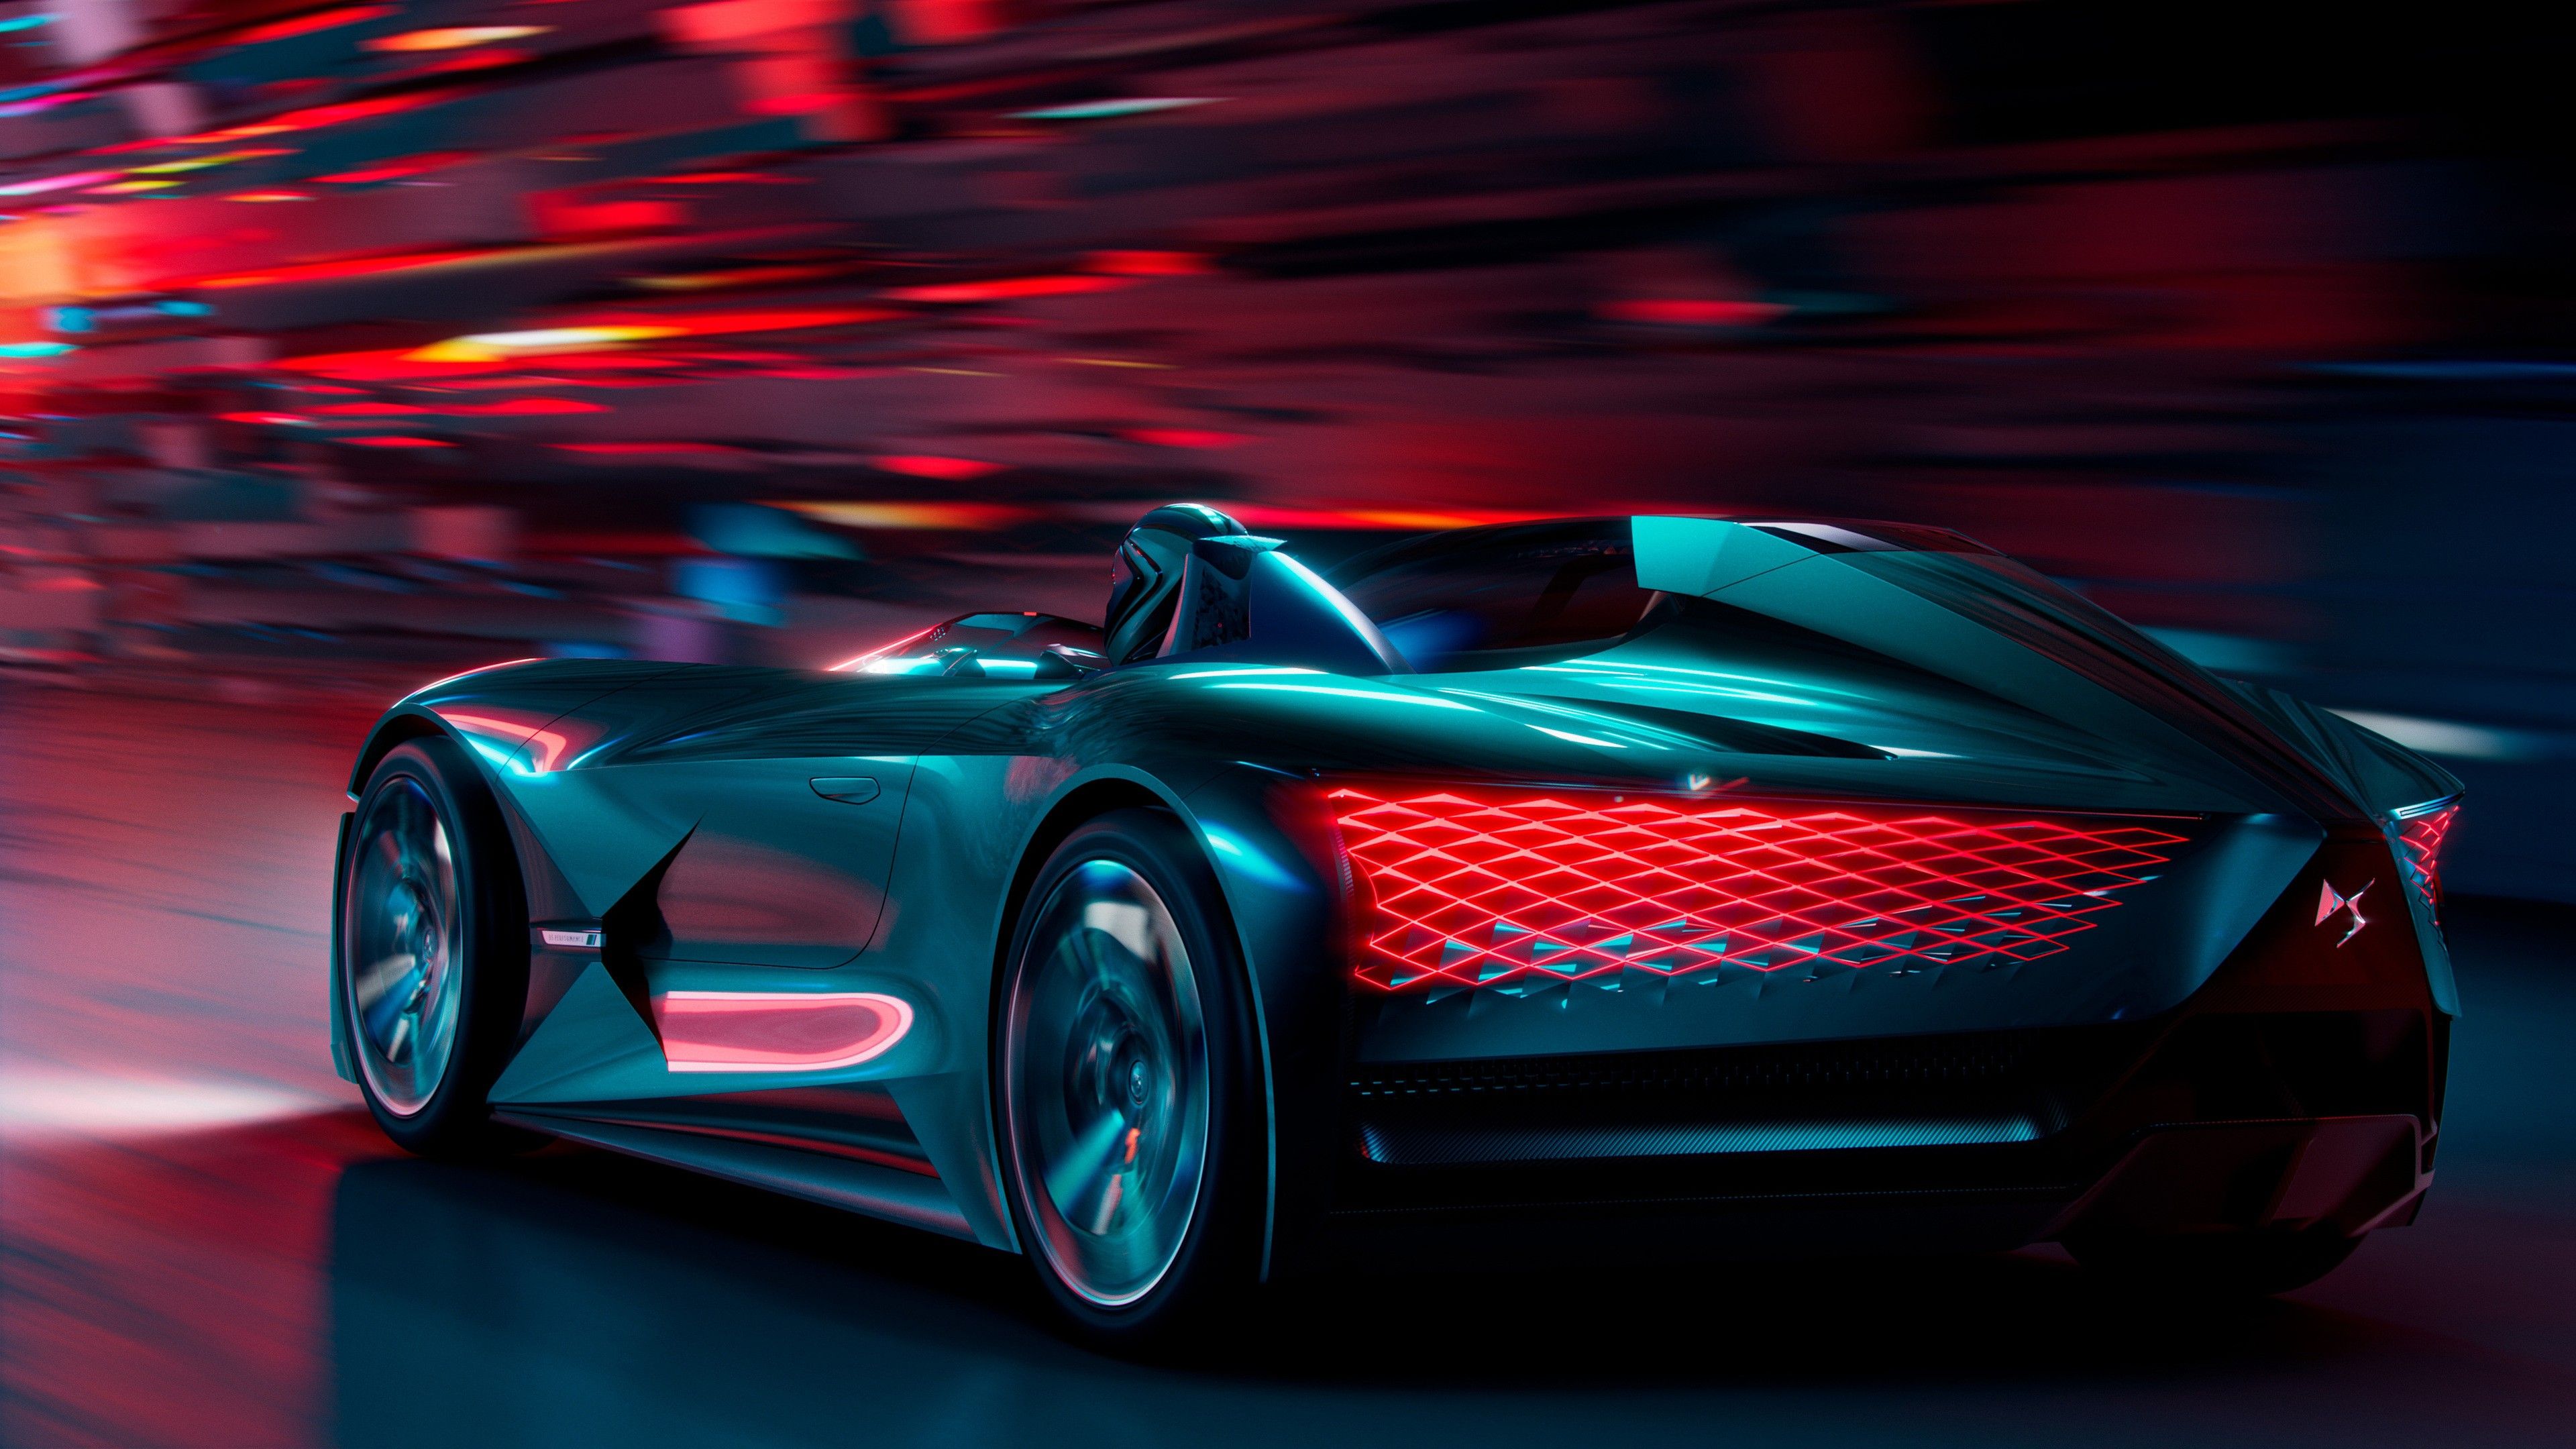 HD Wallpaper for theme: electric car HD wallpaper, background